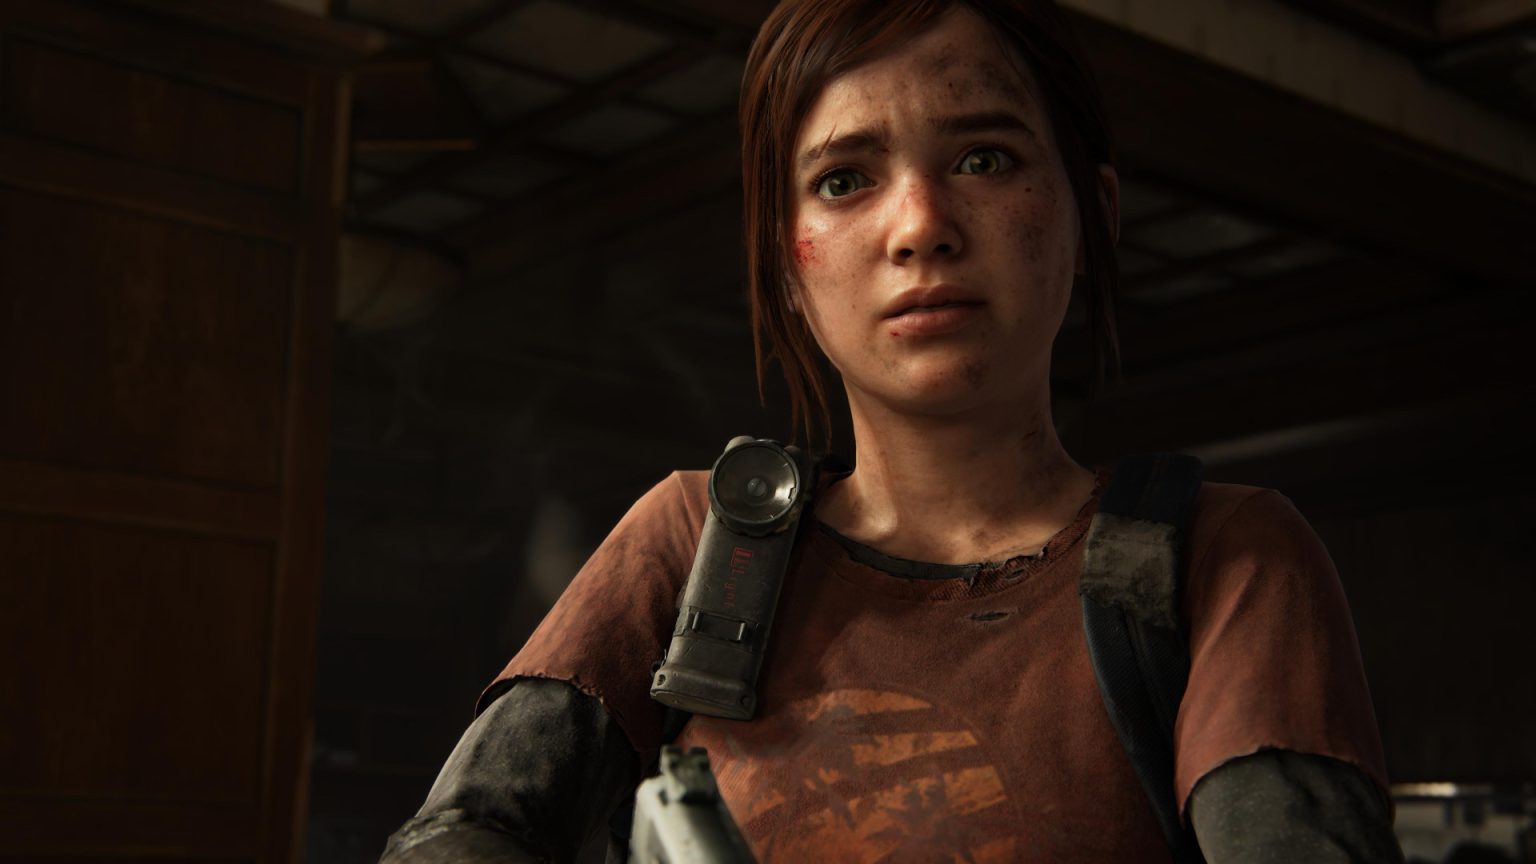 The Last Of Us Nearly Had DLC Based On Ellie's Mom - eXputer.com